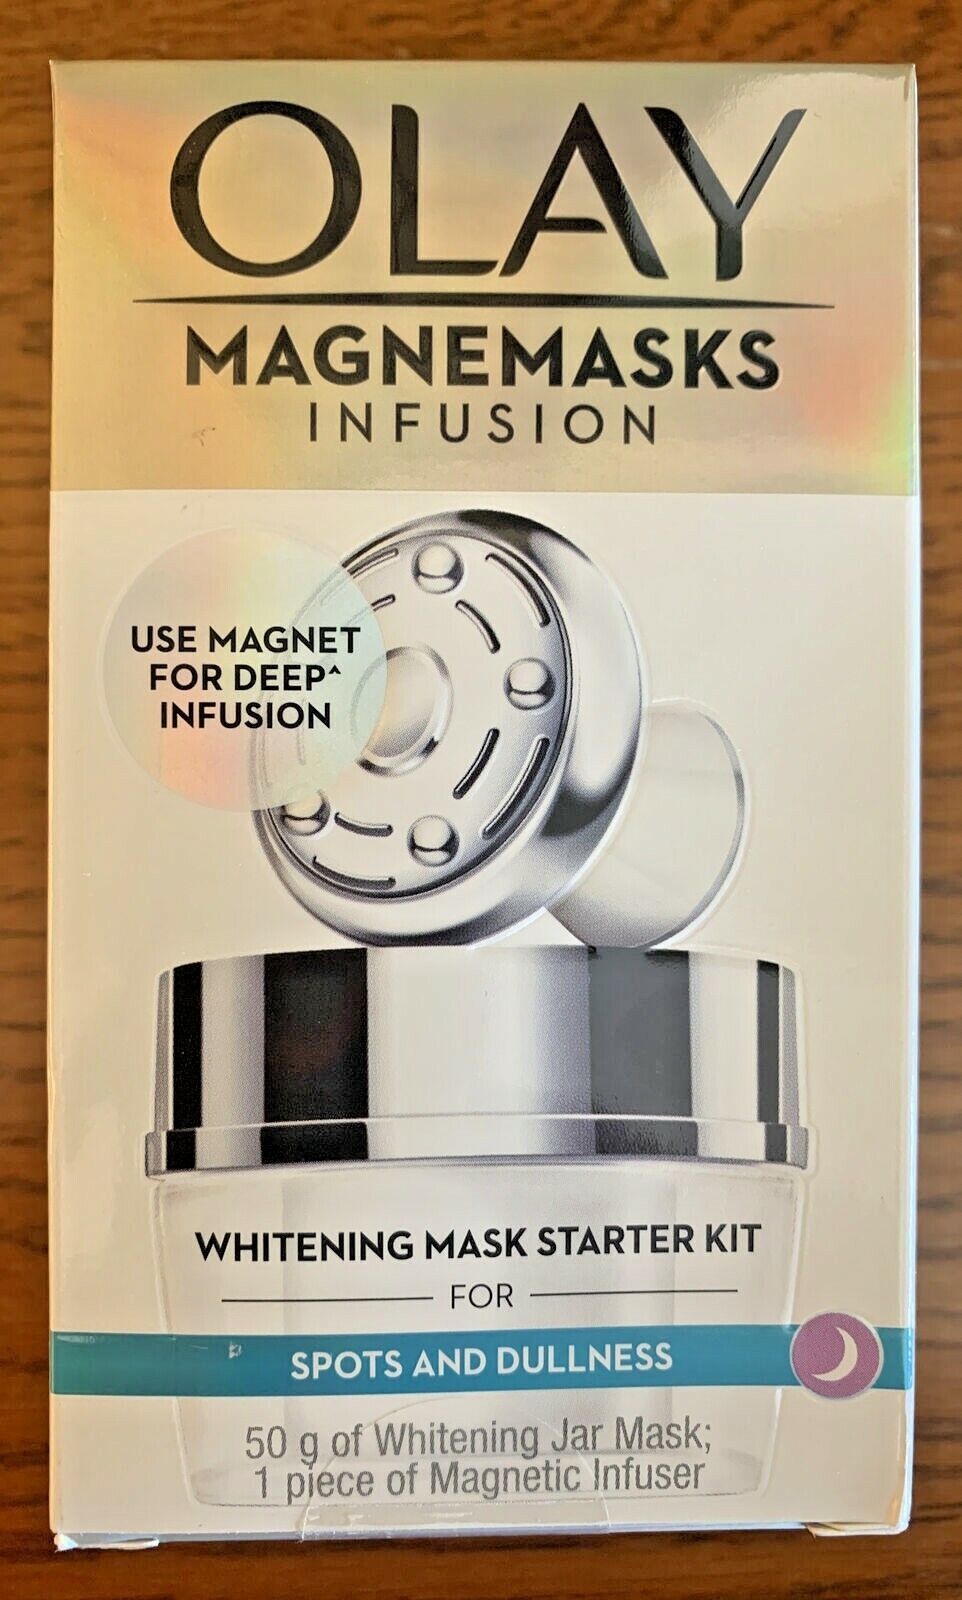 Primary image for Olay Magnemasks Infusion Whitening Mask Starter Kit Spots Dullness 50g New Seal